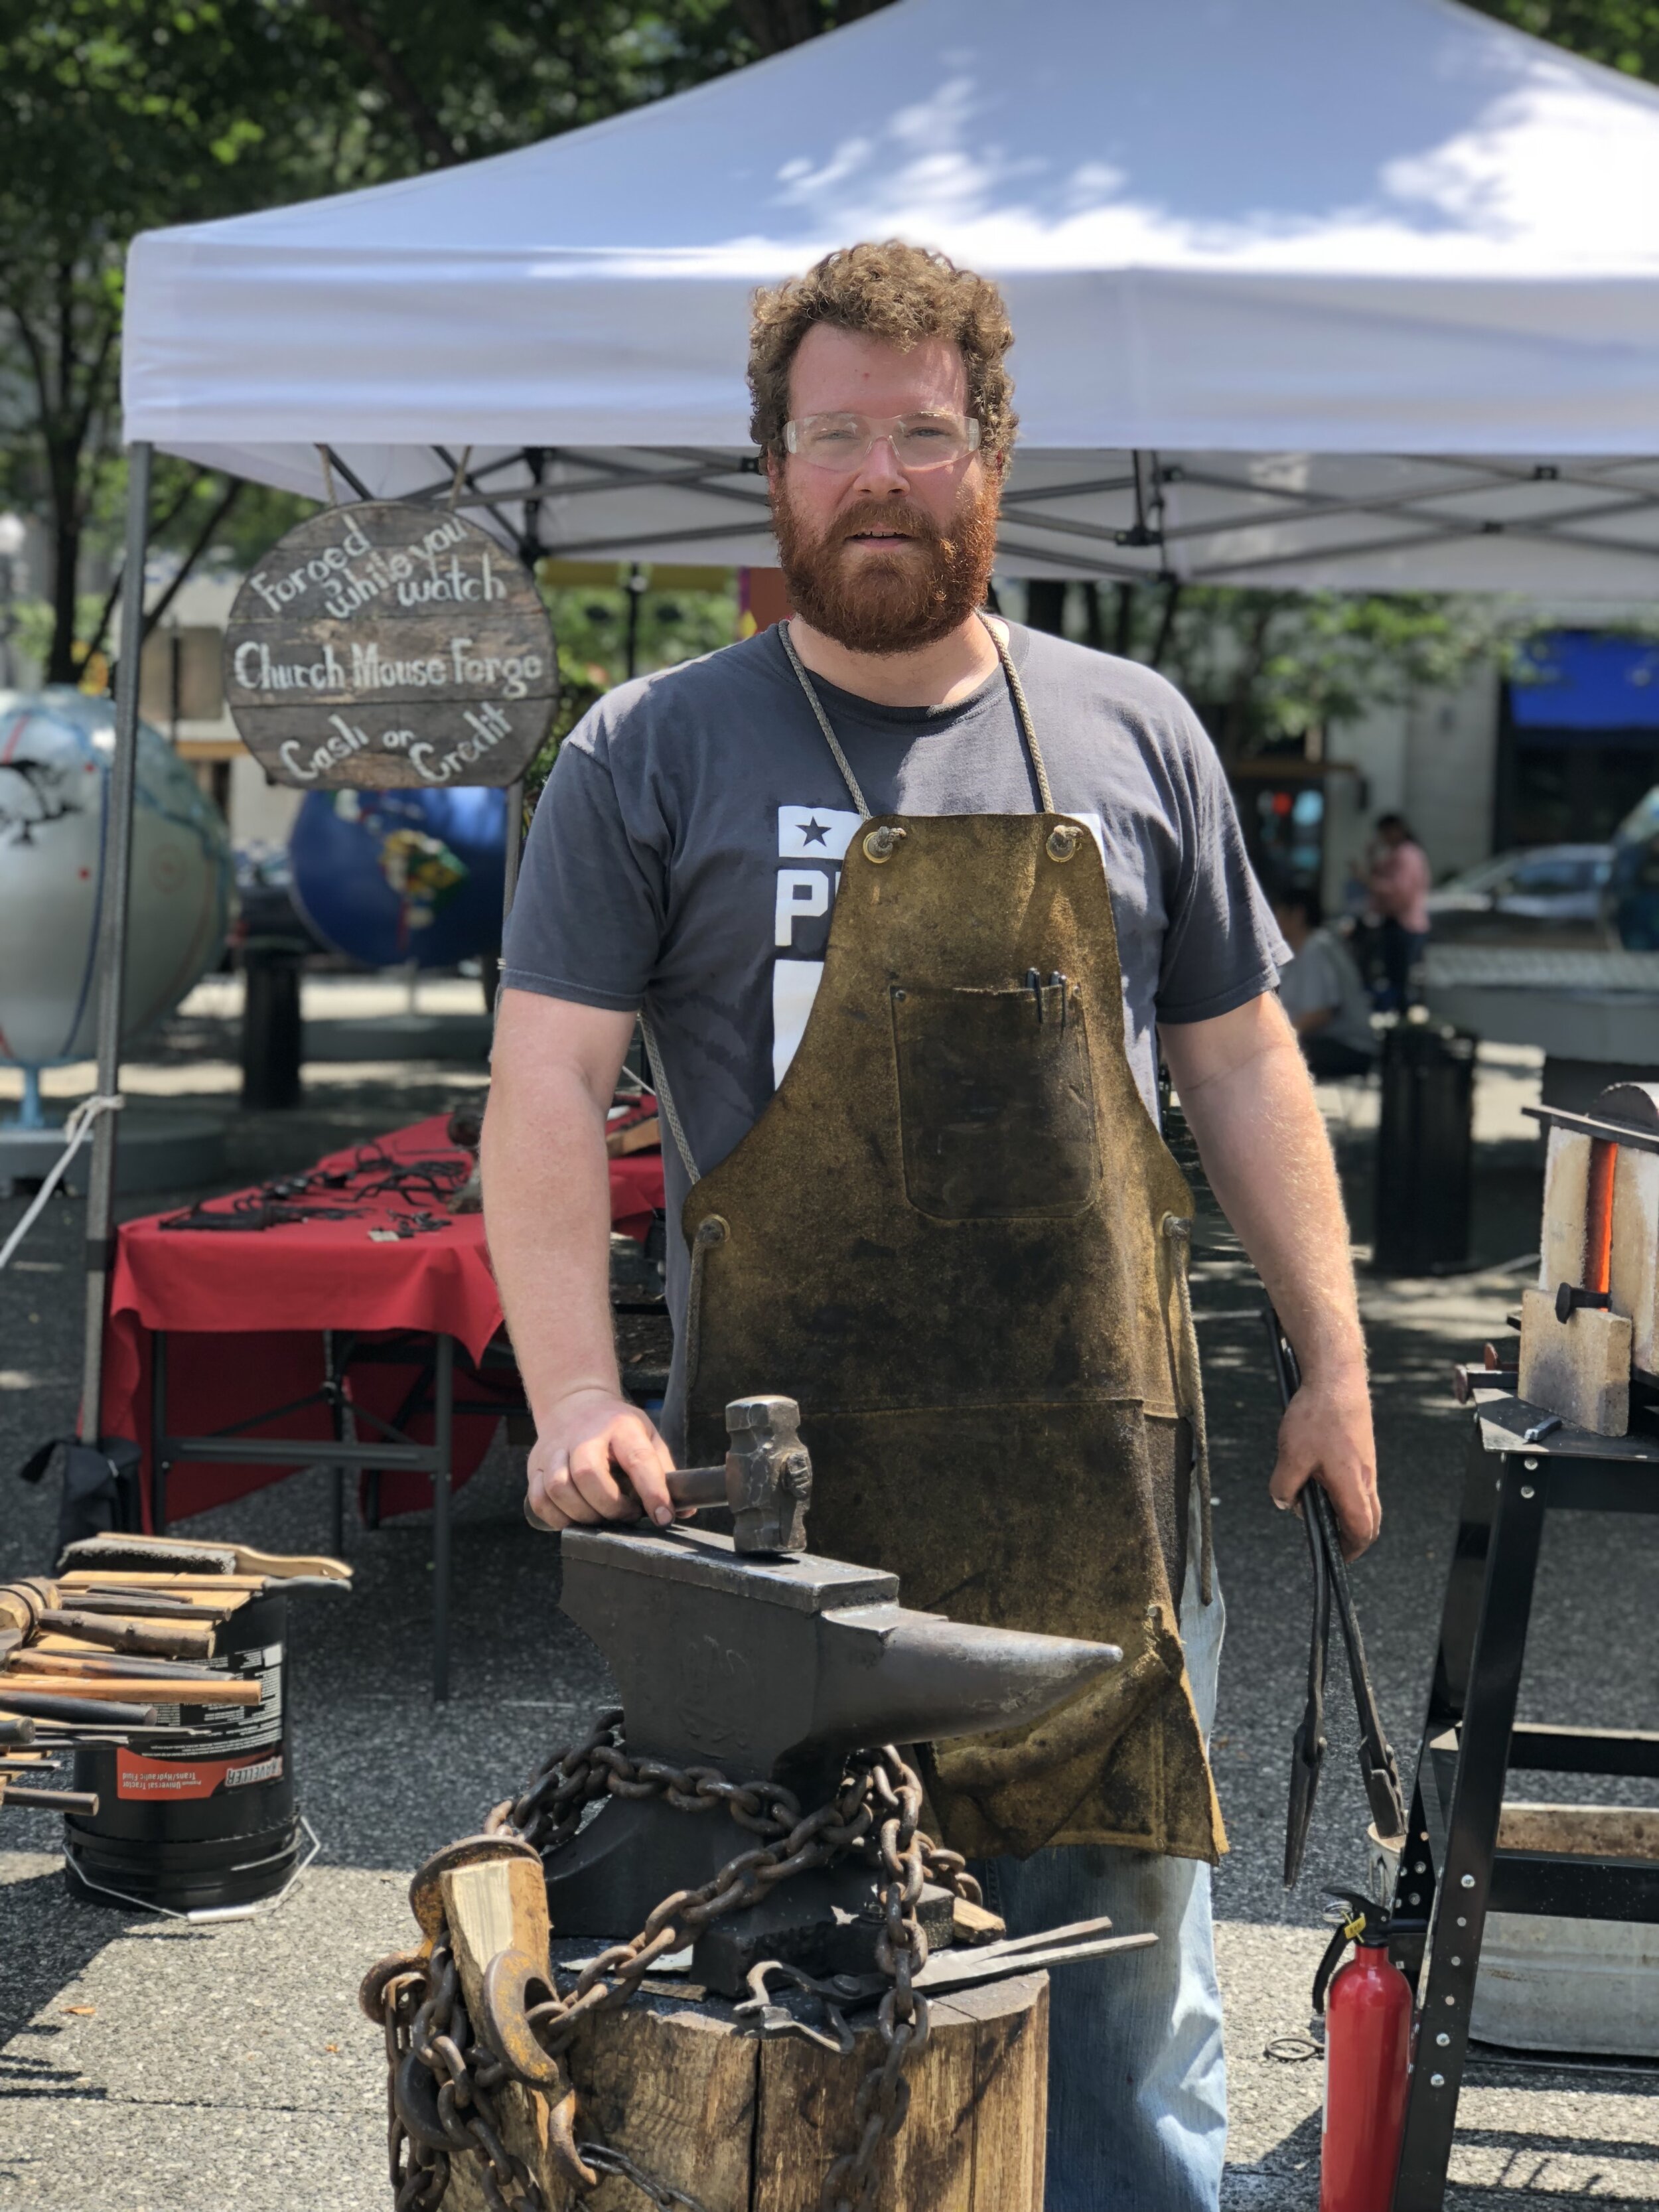 Olof Rolfsson, Owner of Church Mouse Forge, operating a forge at the Market Square for an event